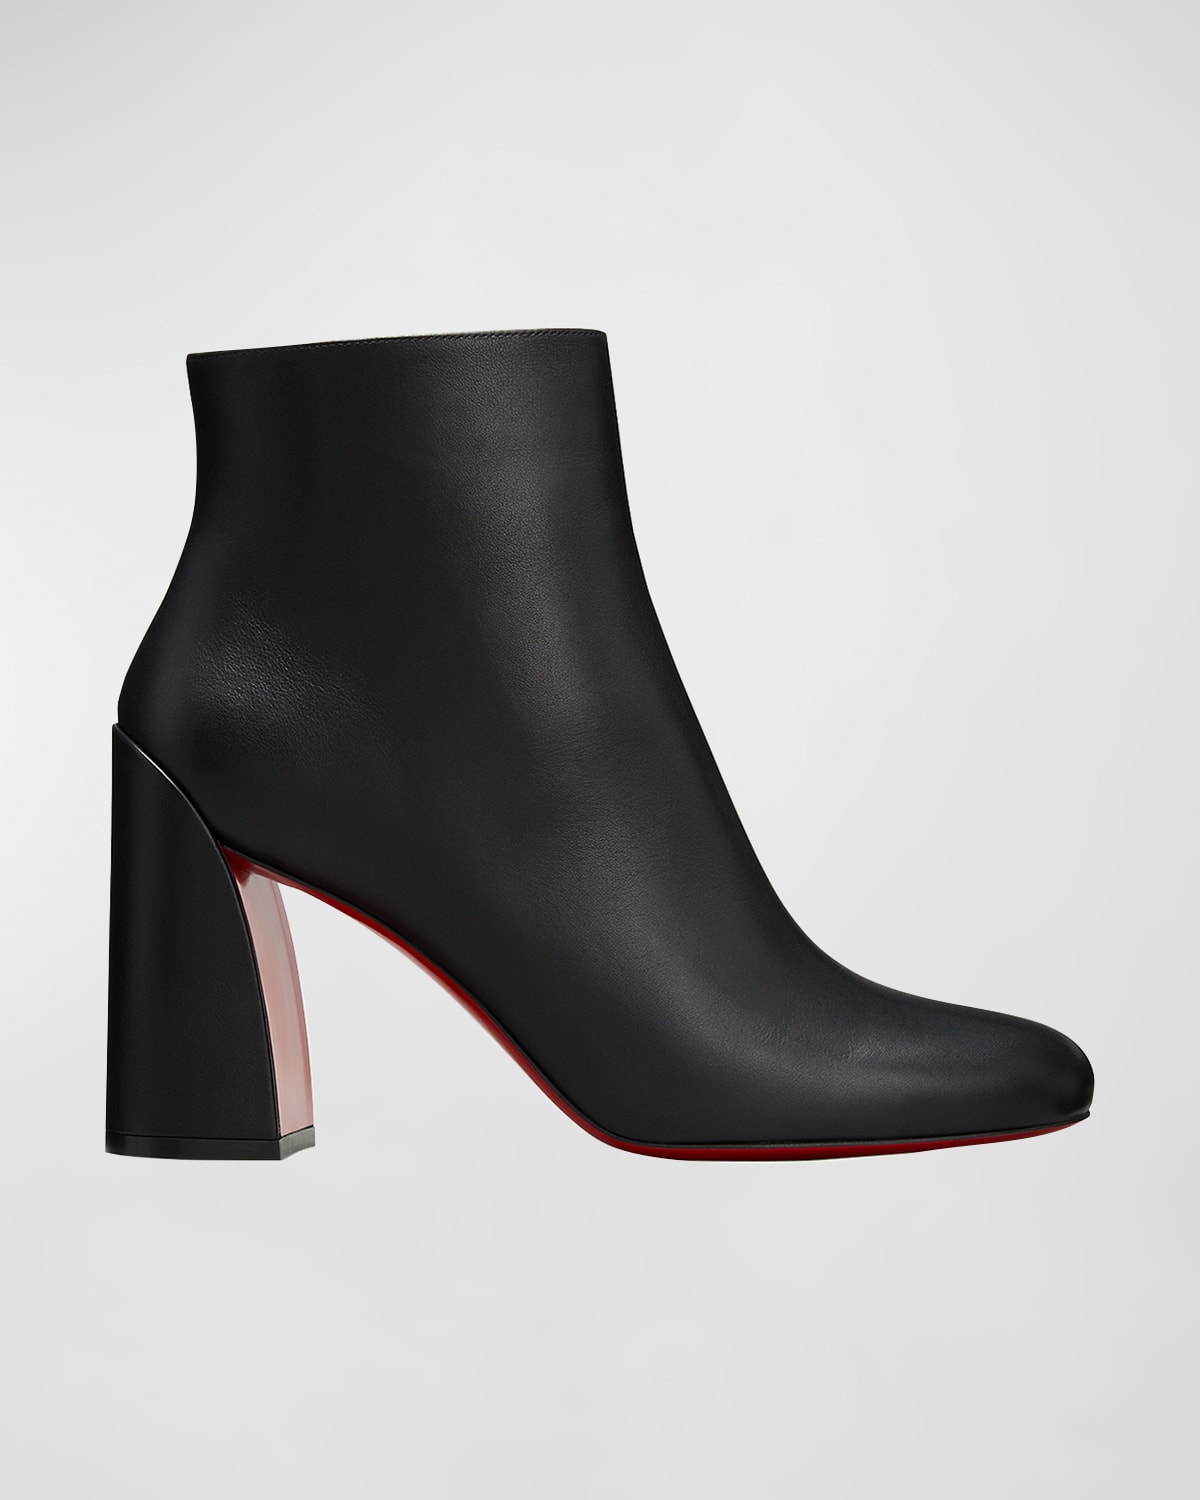 Turela Calfskin Red Sole Ankle Booties